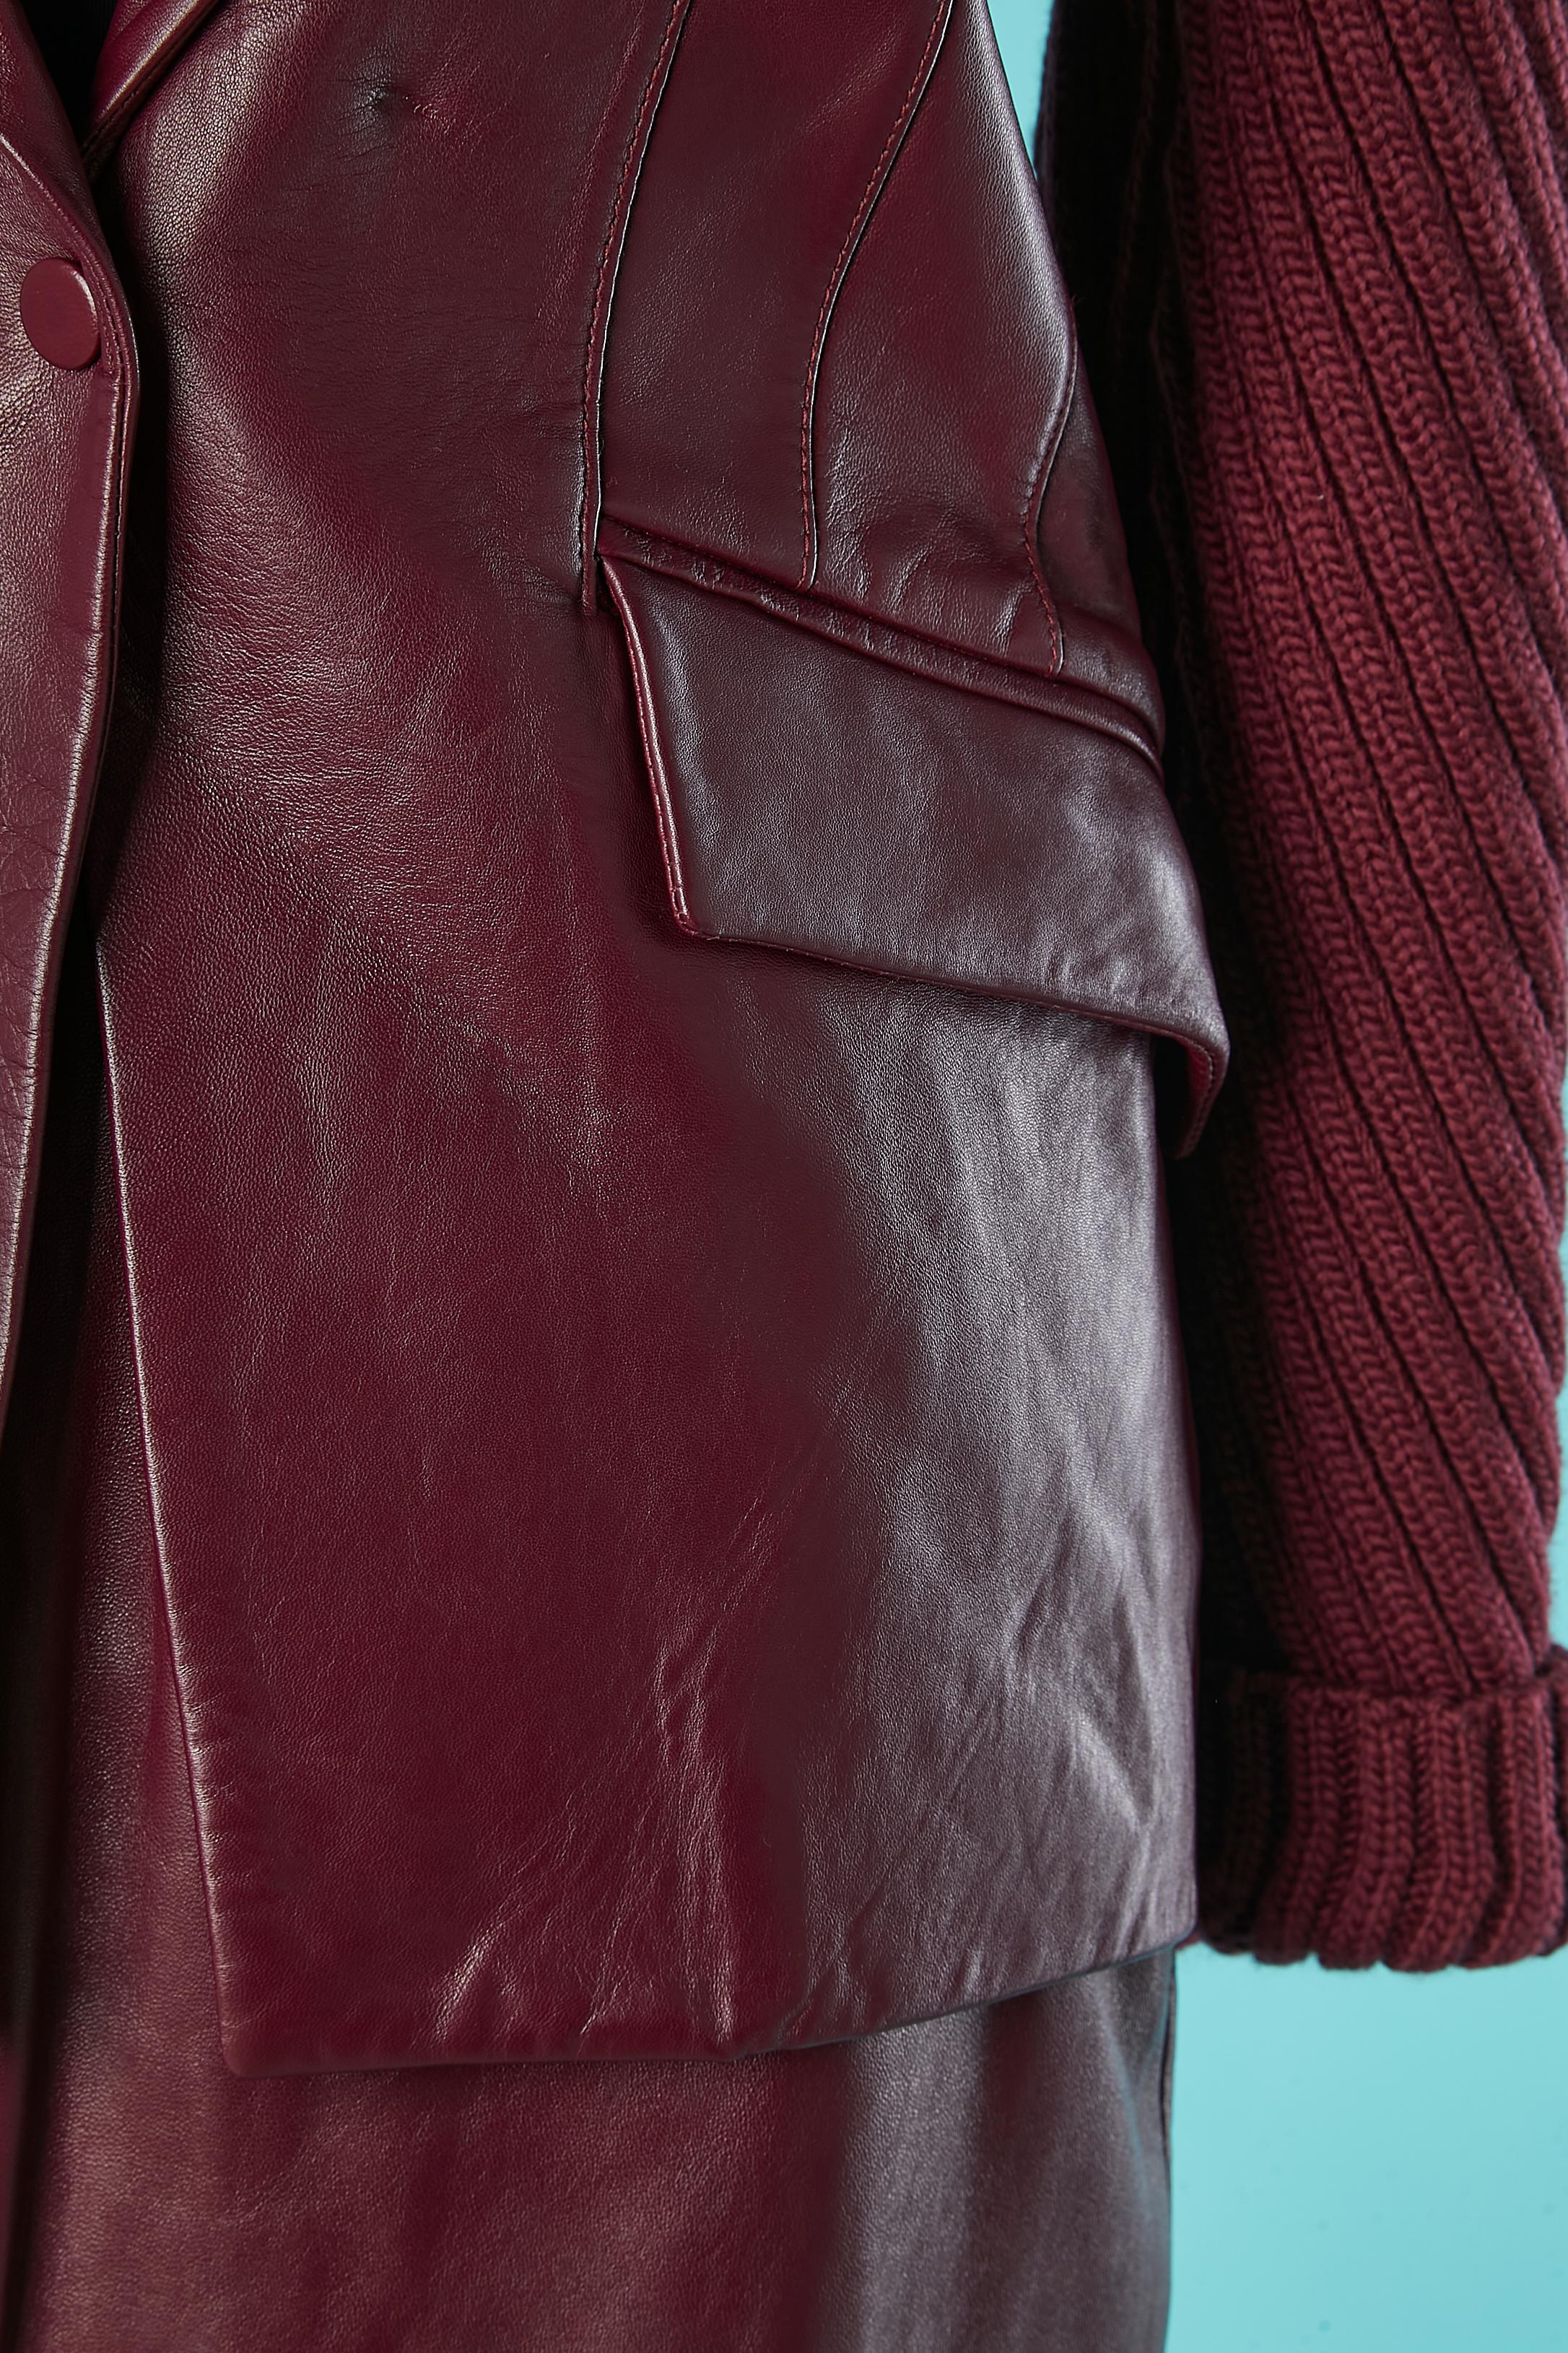 Burgundy skirt-suit in wool knit and leather MUGLER Circa 1990's  In Excellent Condition For Sale In Saint-Ouen-Sur-Seine, FR